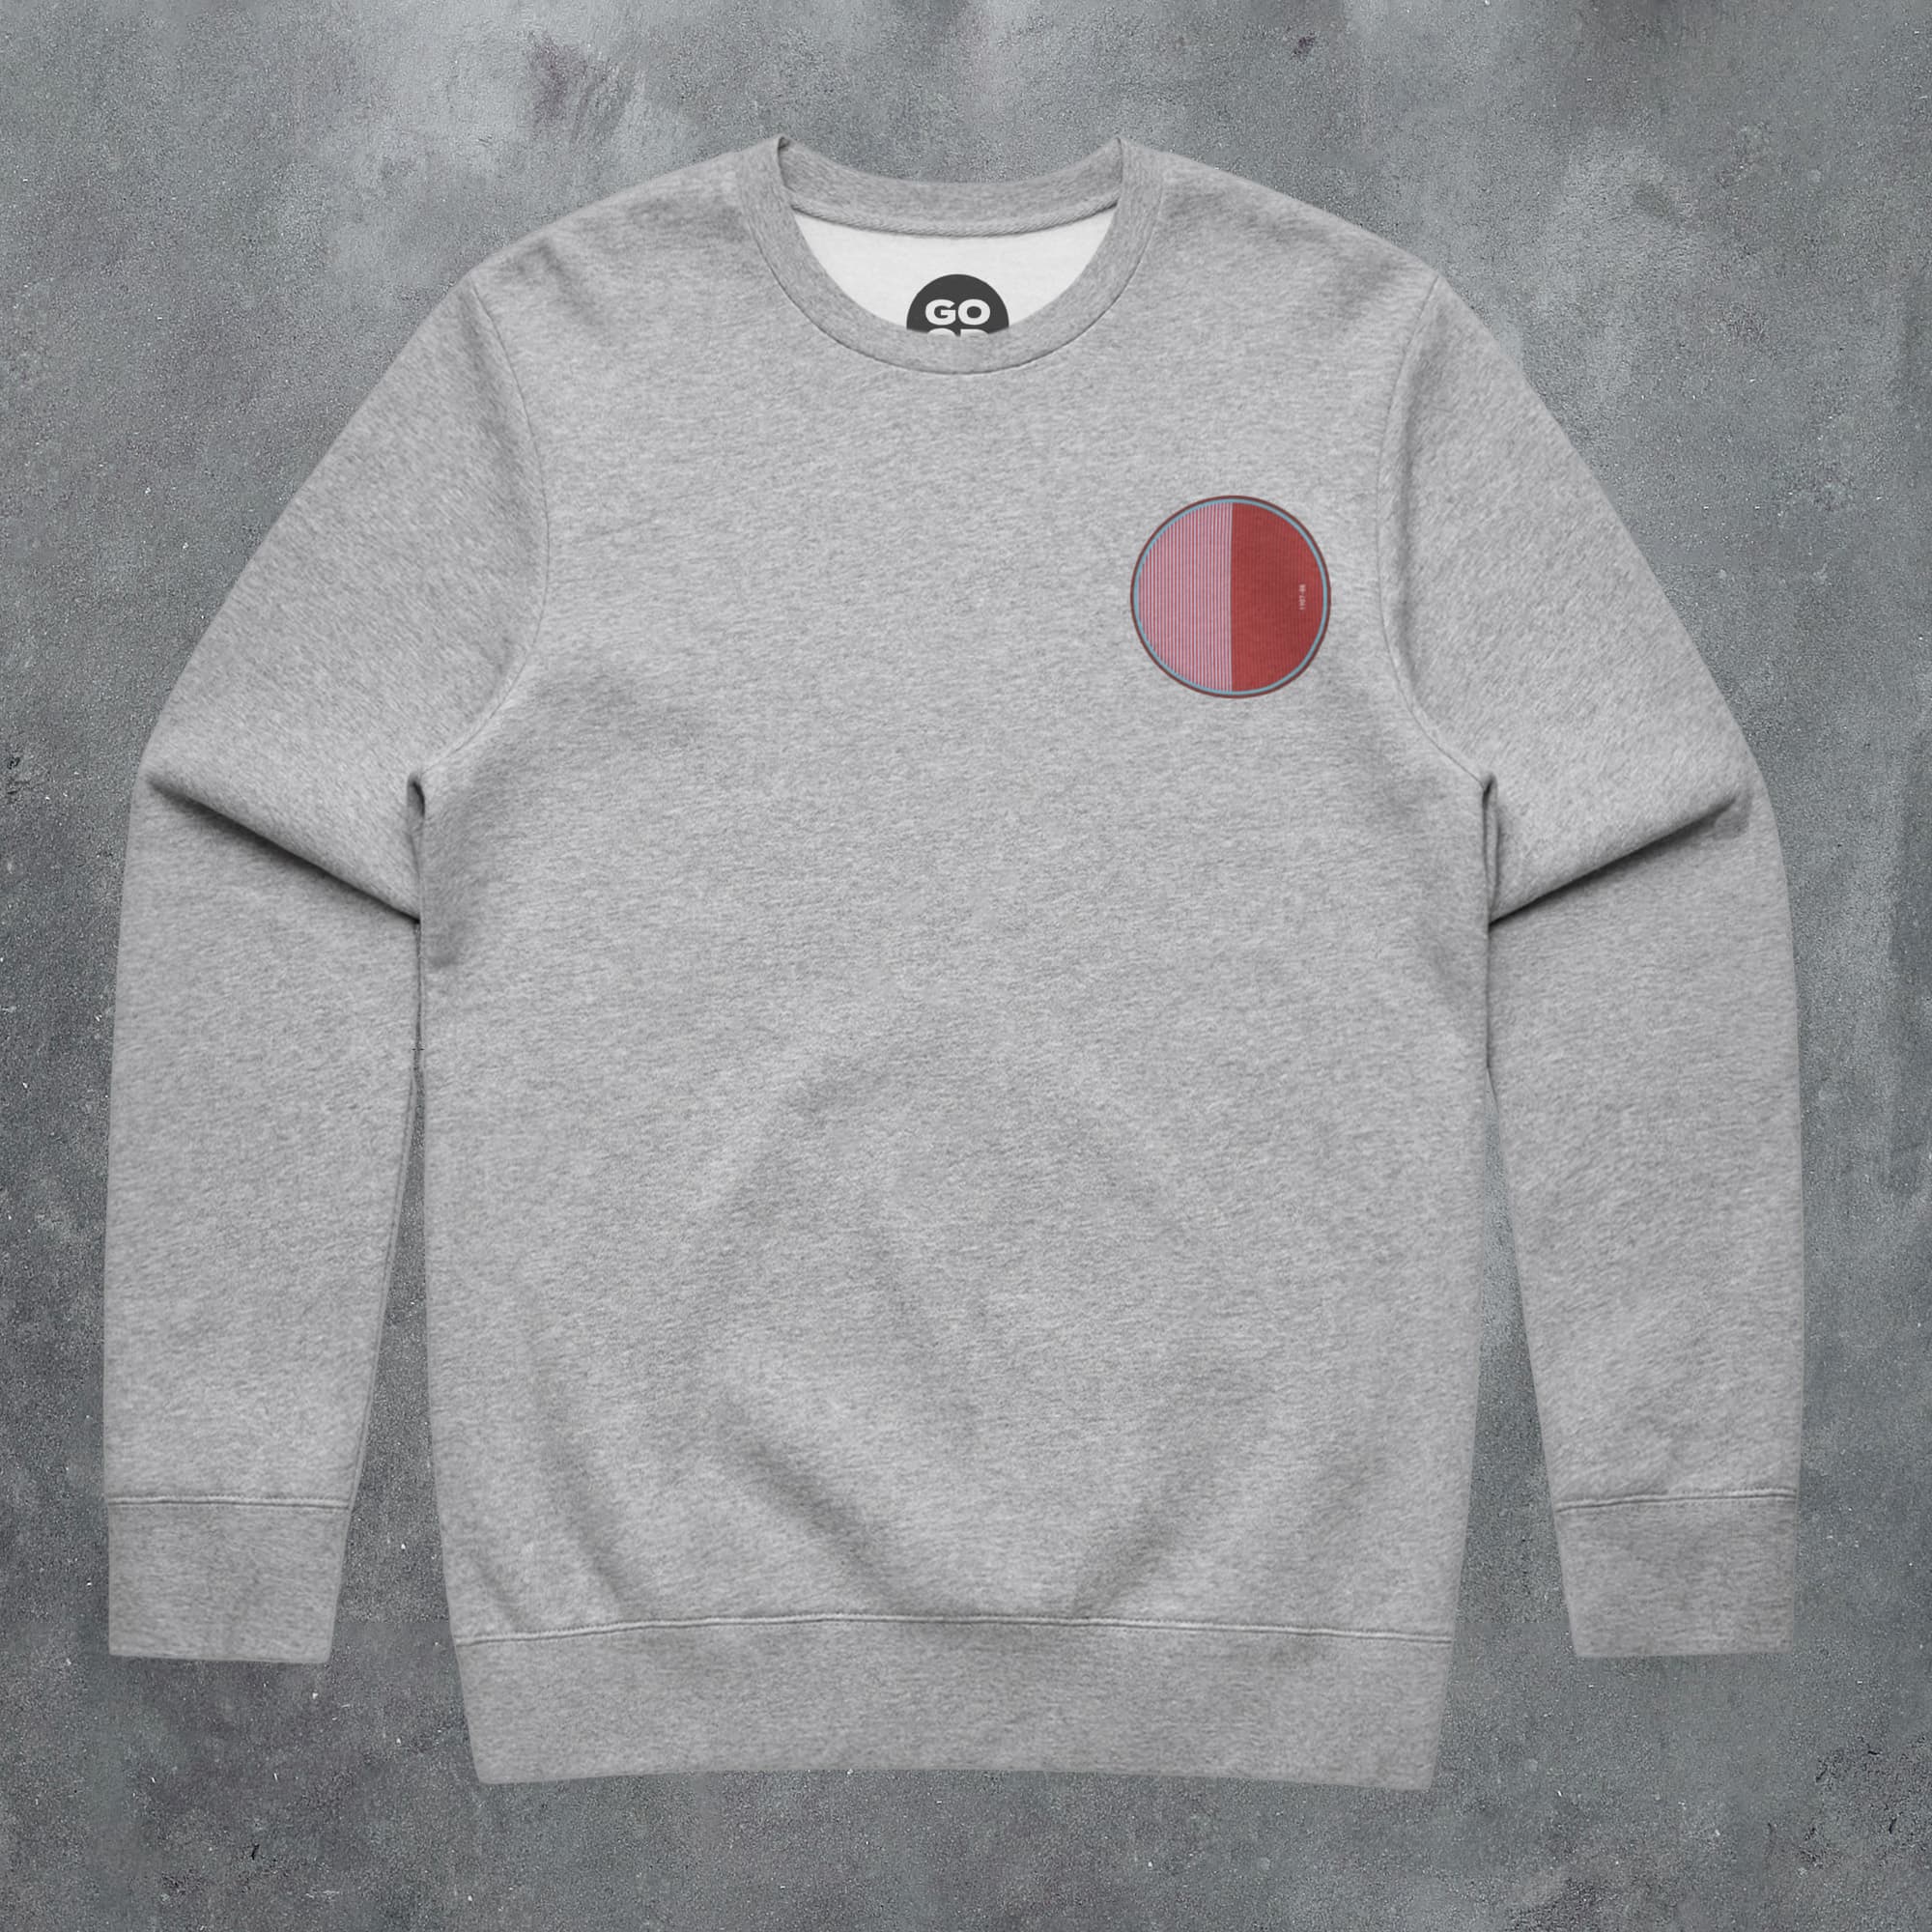 a grey sweatshirt with a red circle on it